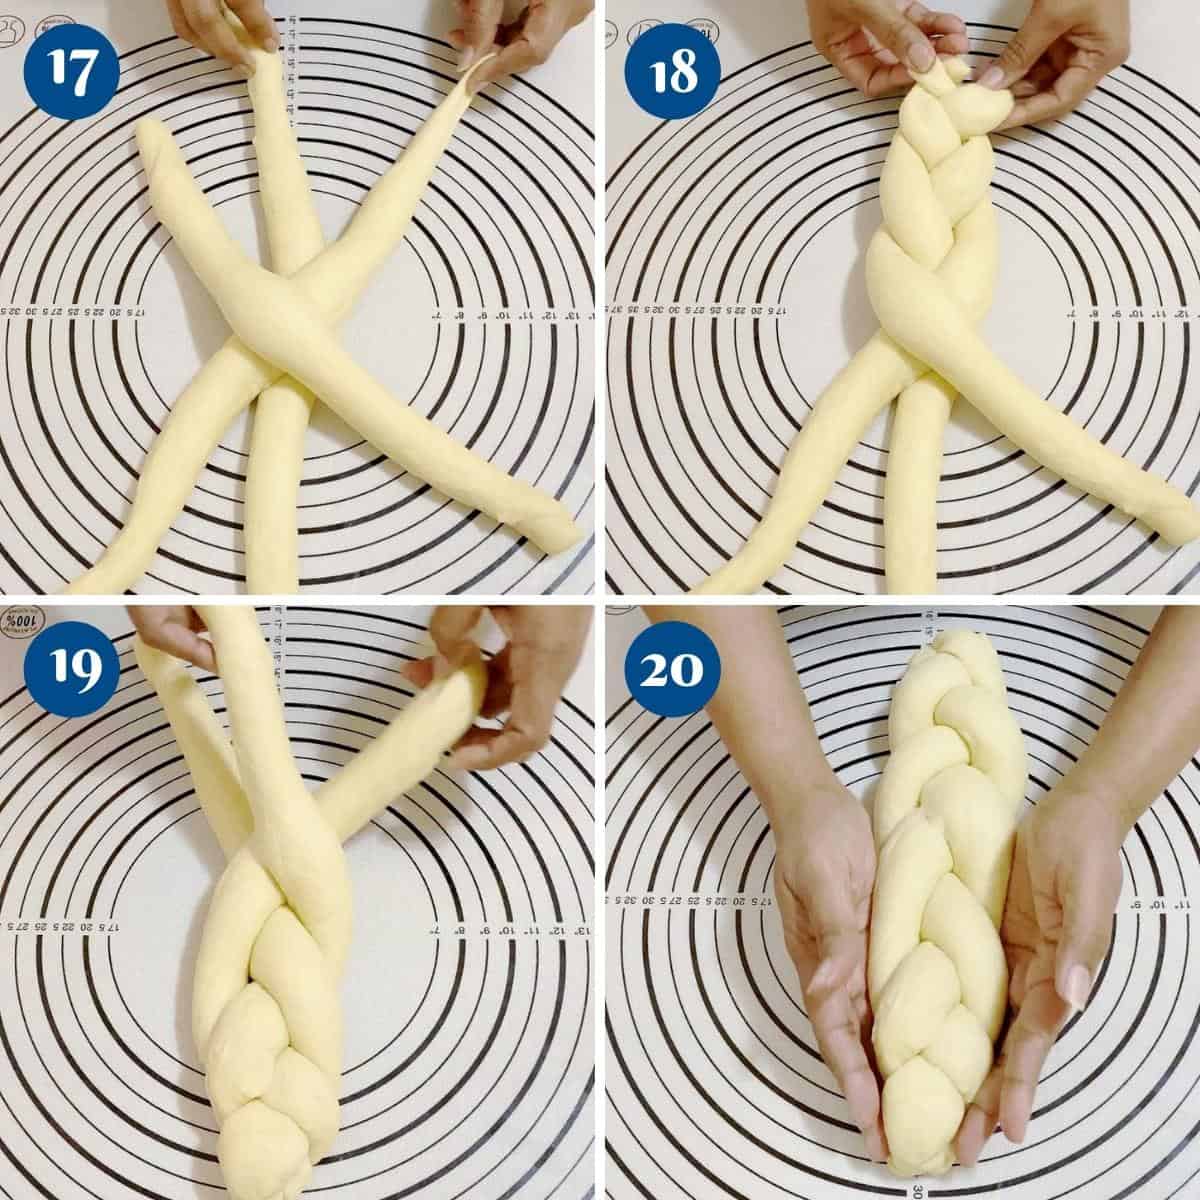 Progress pictures for braiding challah.